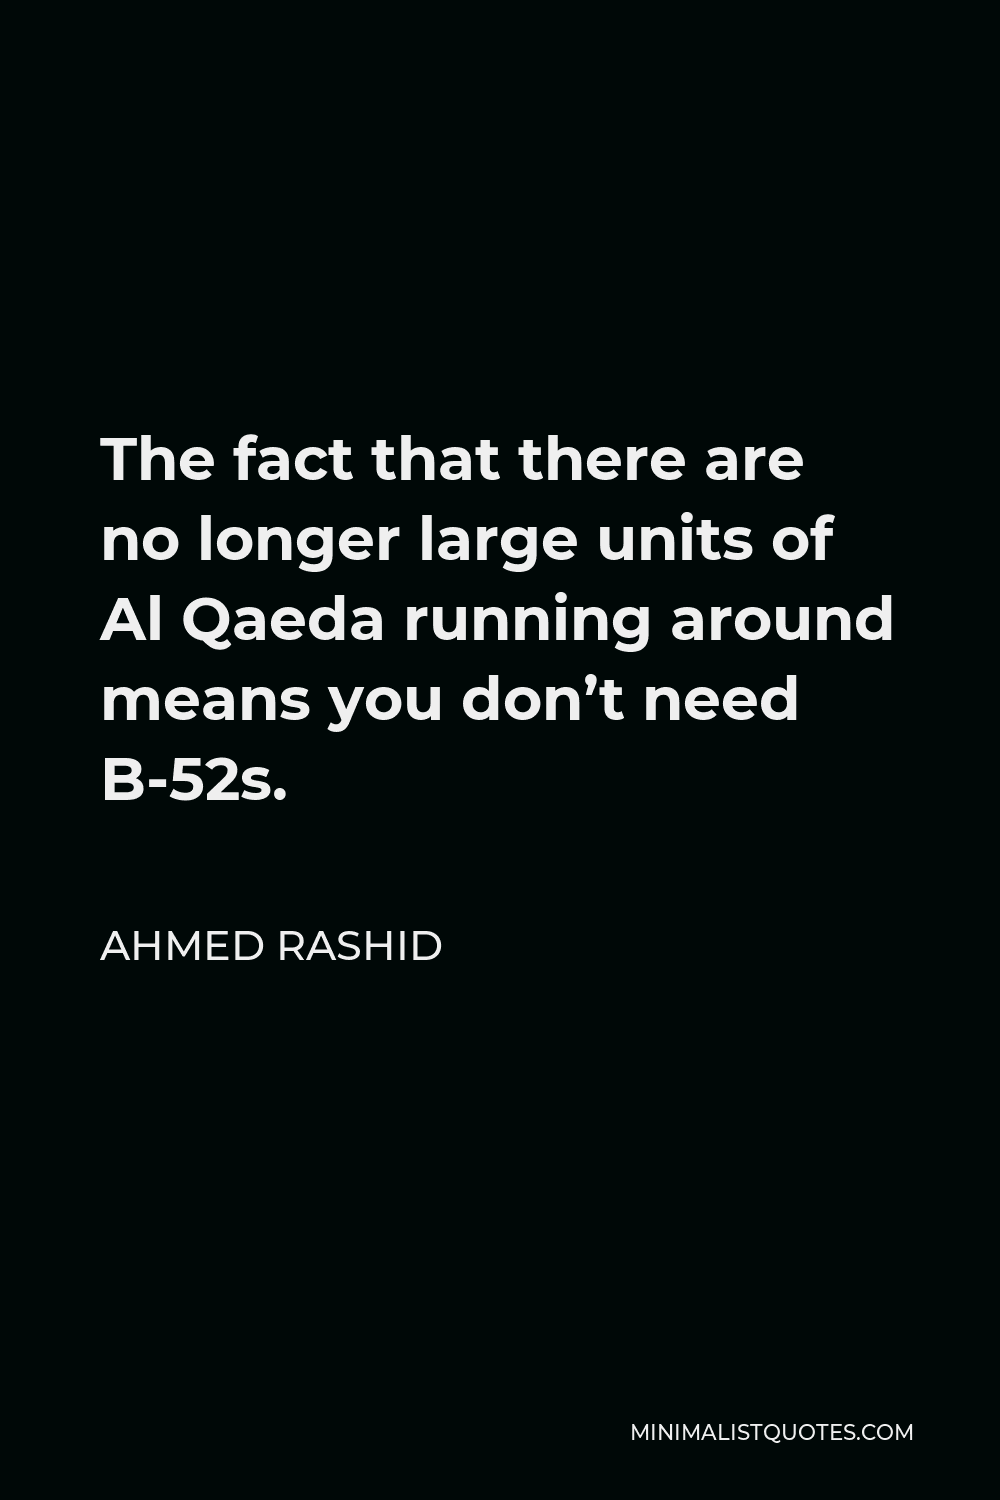 Ahmed Rashid Quote - The fact that there are no longer large units of Al Qaeda running around means you don’t need B-52s.